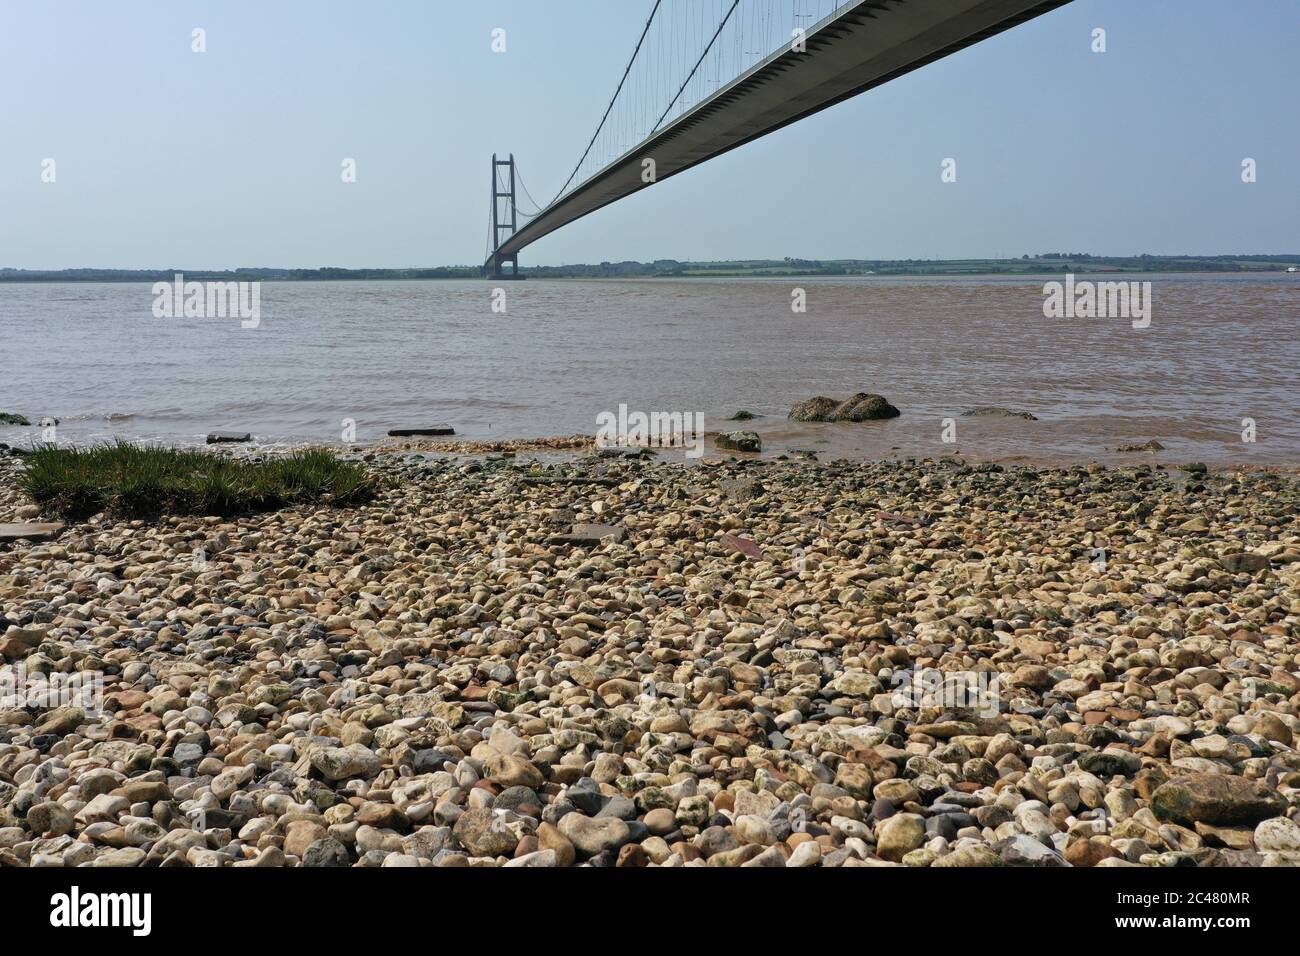 A view of the Humber Bridge, near Kingston upon Hull, East Riding of Yorkshire, which is a 2.22-kilometre single-span road suspension bridge, which opened to traffic on 24 June 1981. Stock Photo